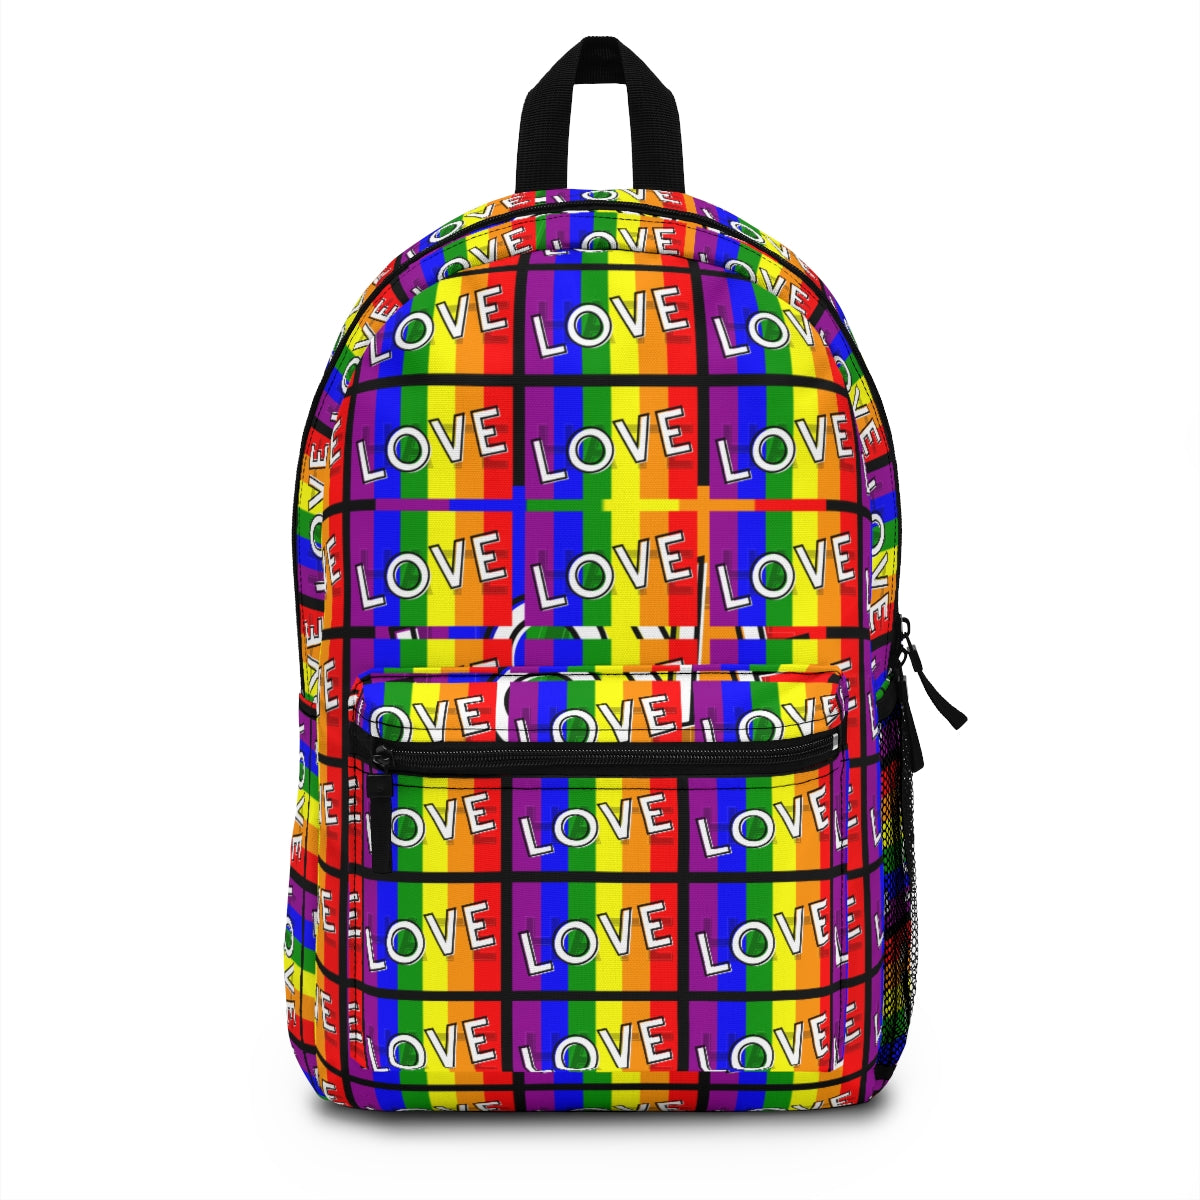 Love over Hate Backpack